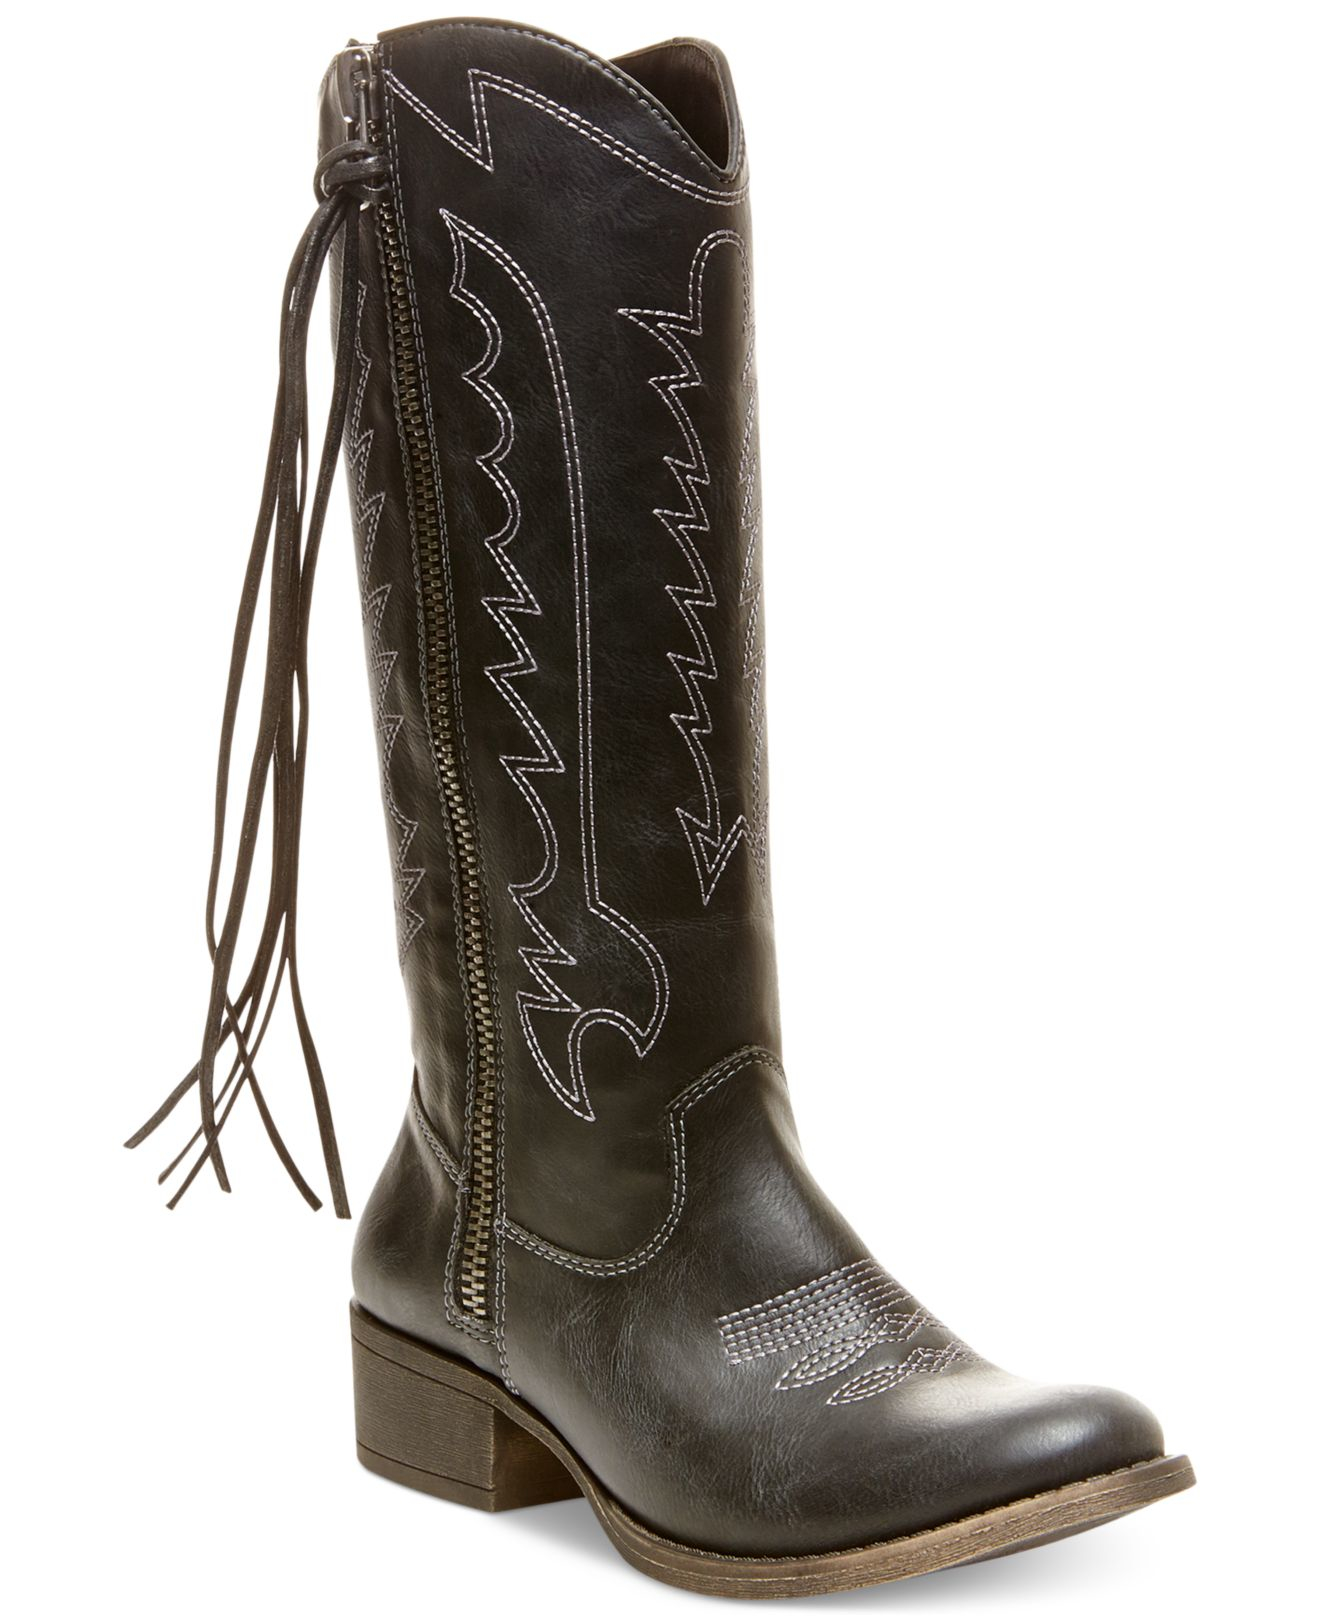 Lyst - Madden Girl Durant Cowboy Boots in Black